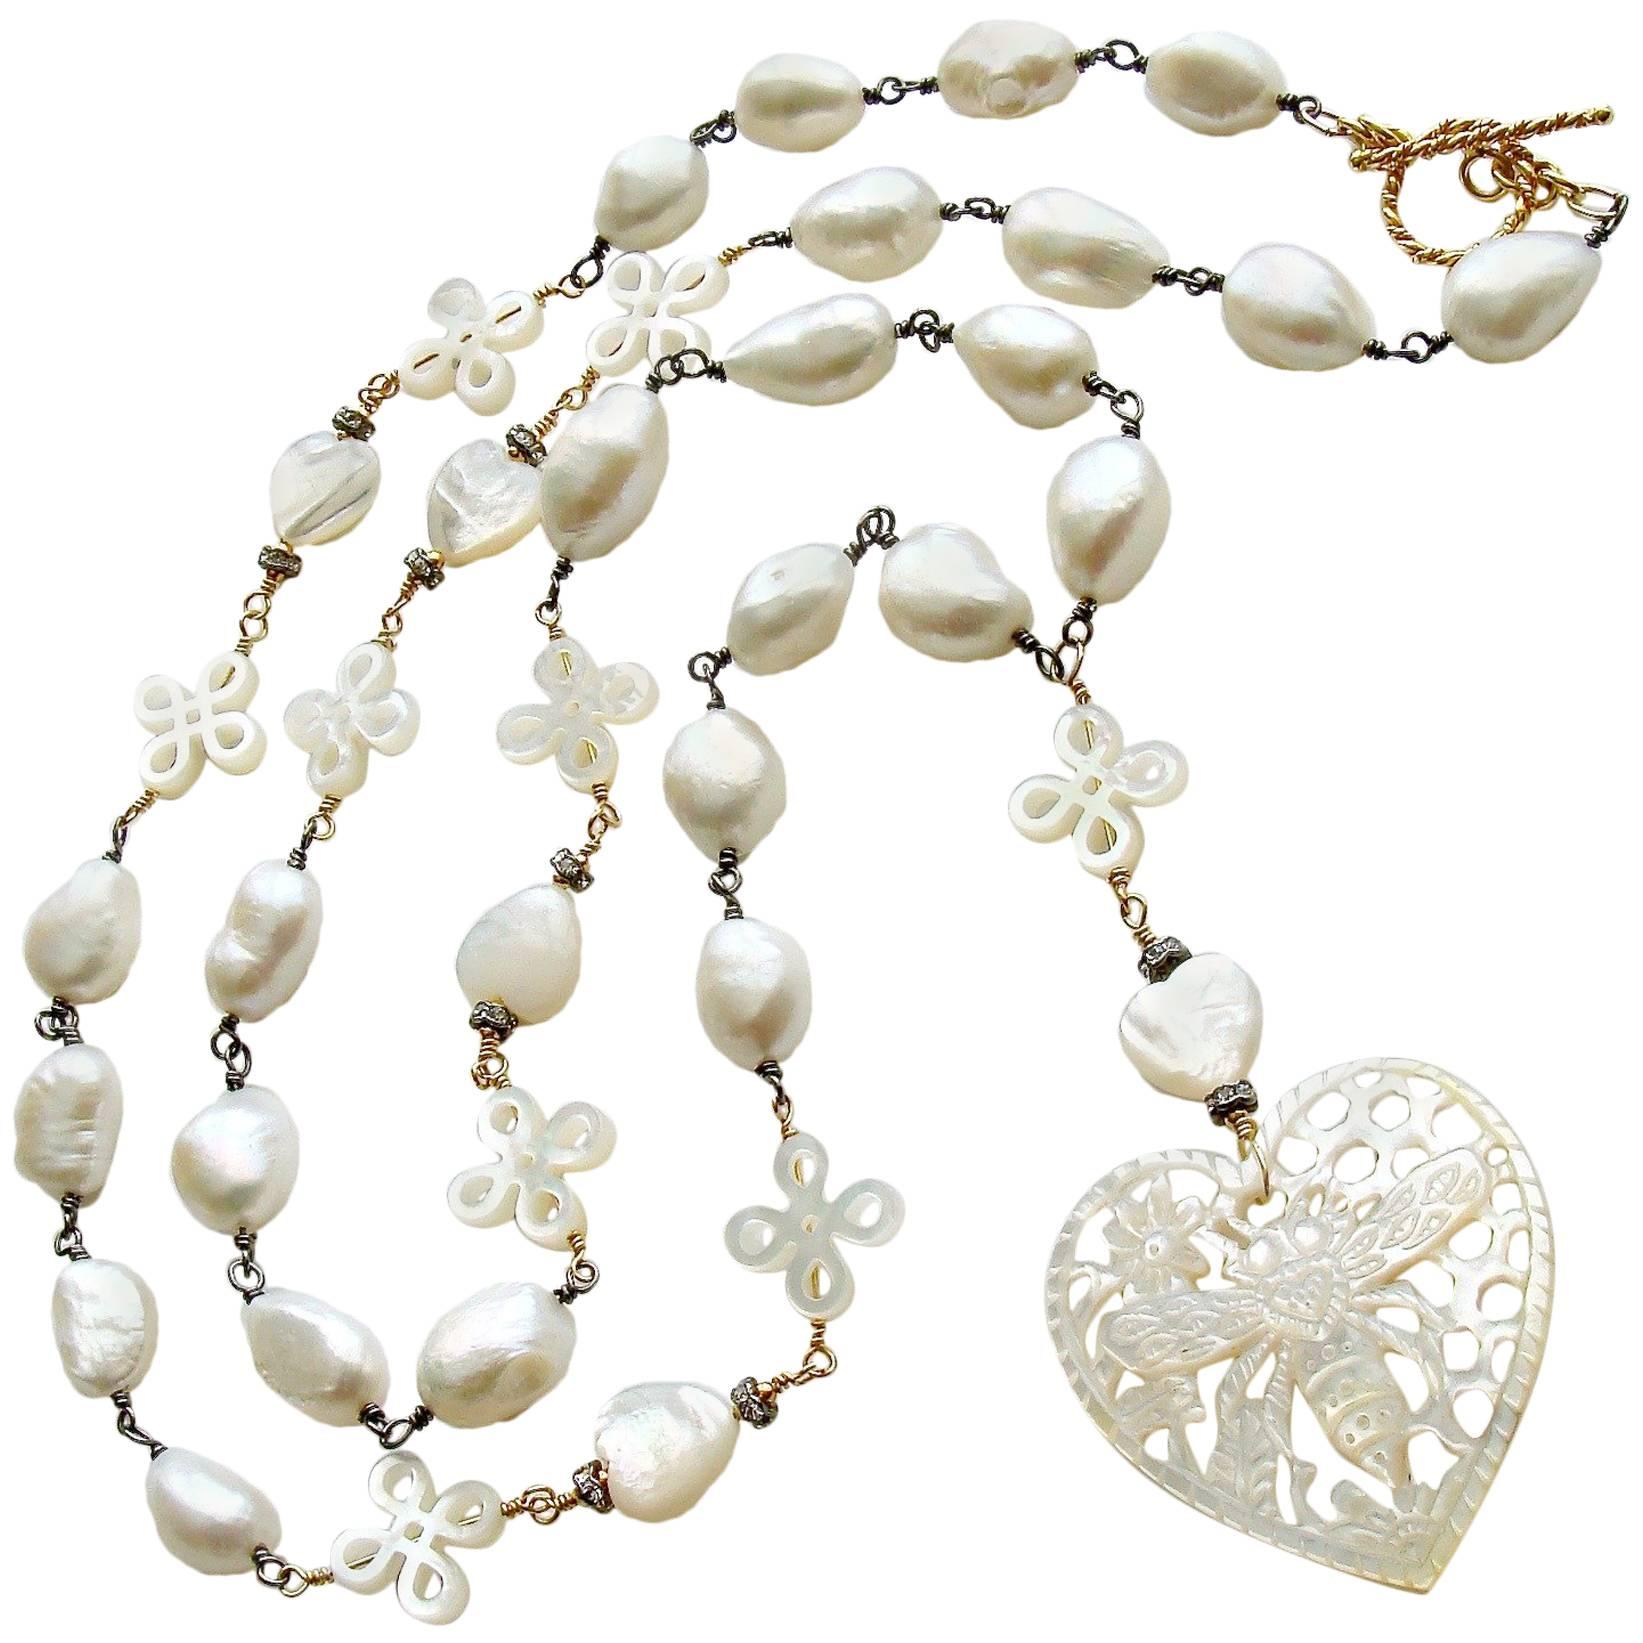 Baroque Freshwater Pearls Carved Mother-of-Pearl Queen Bee Heart Necklace